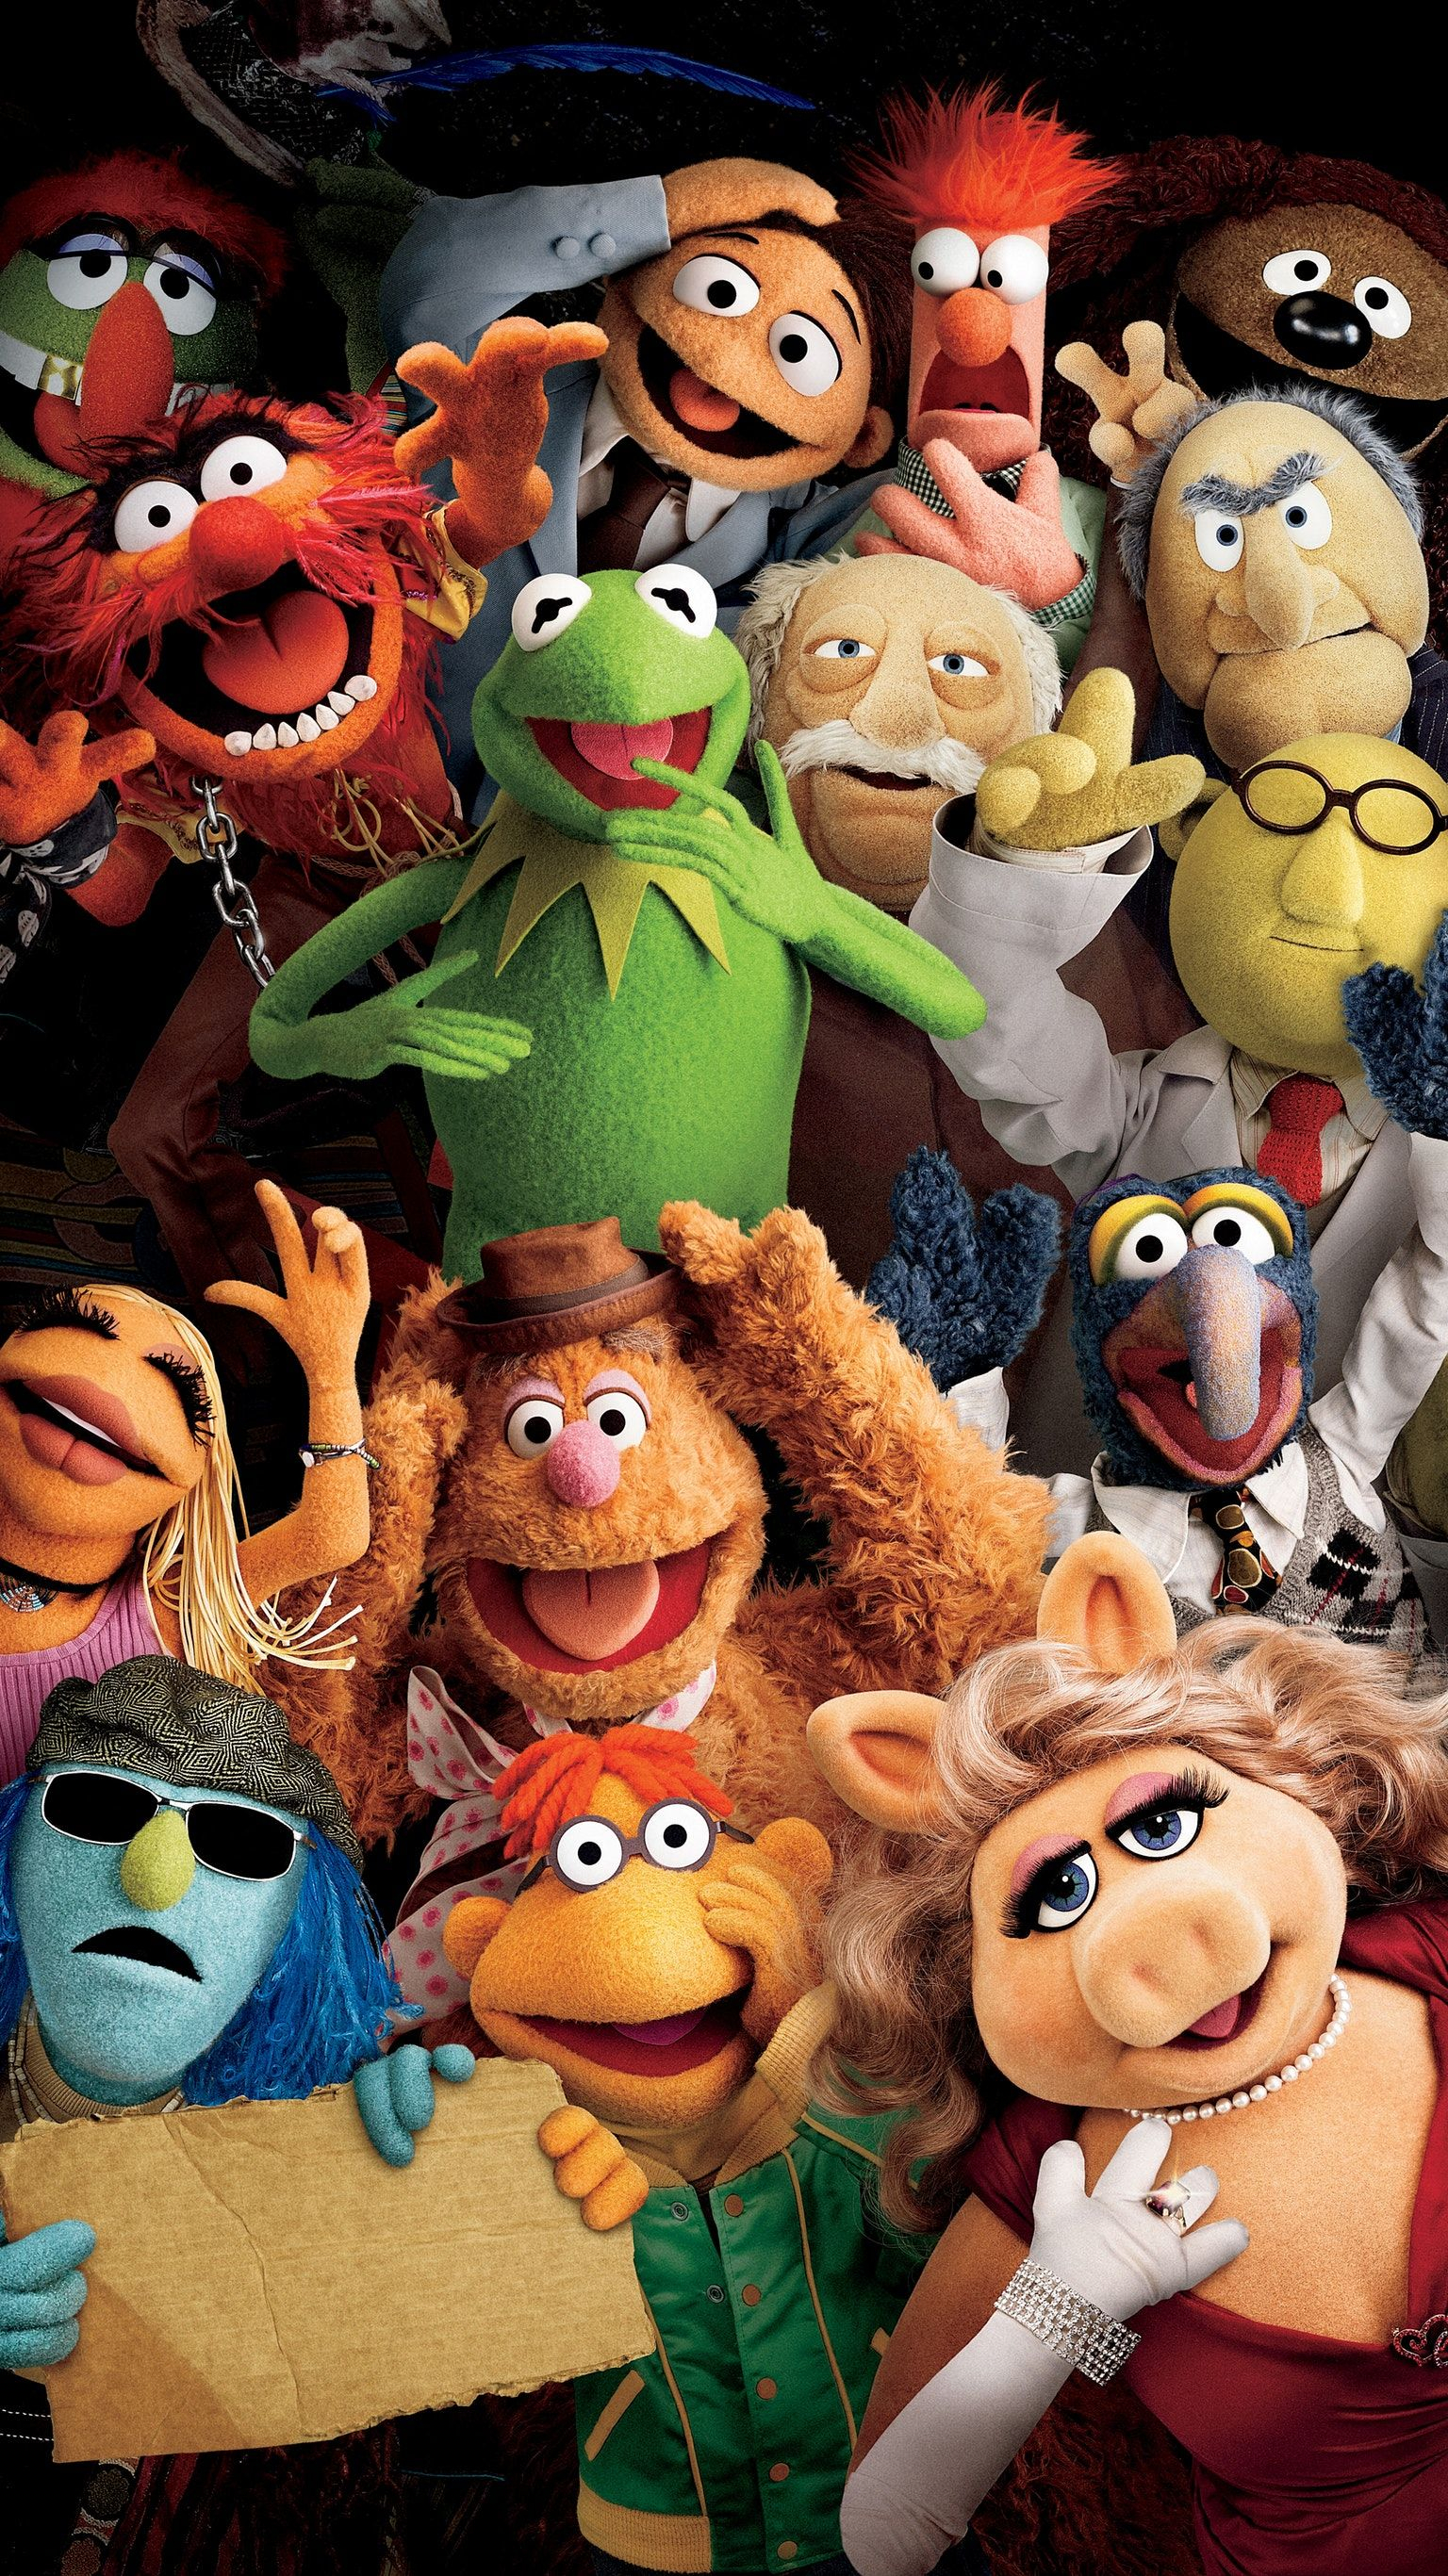 1536x2733 The Muppets (2011) Phone Wallpaper | Moviemania | The muppets 2011, Muppets, The muppet show